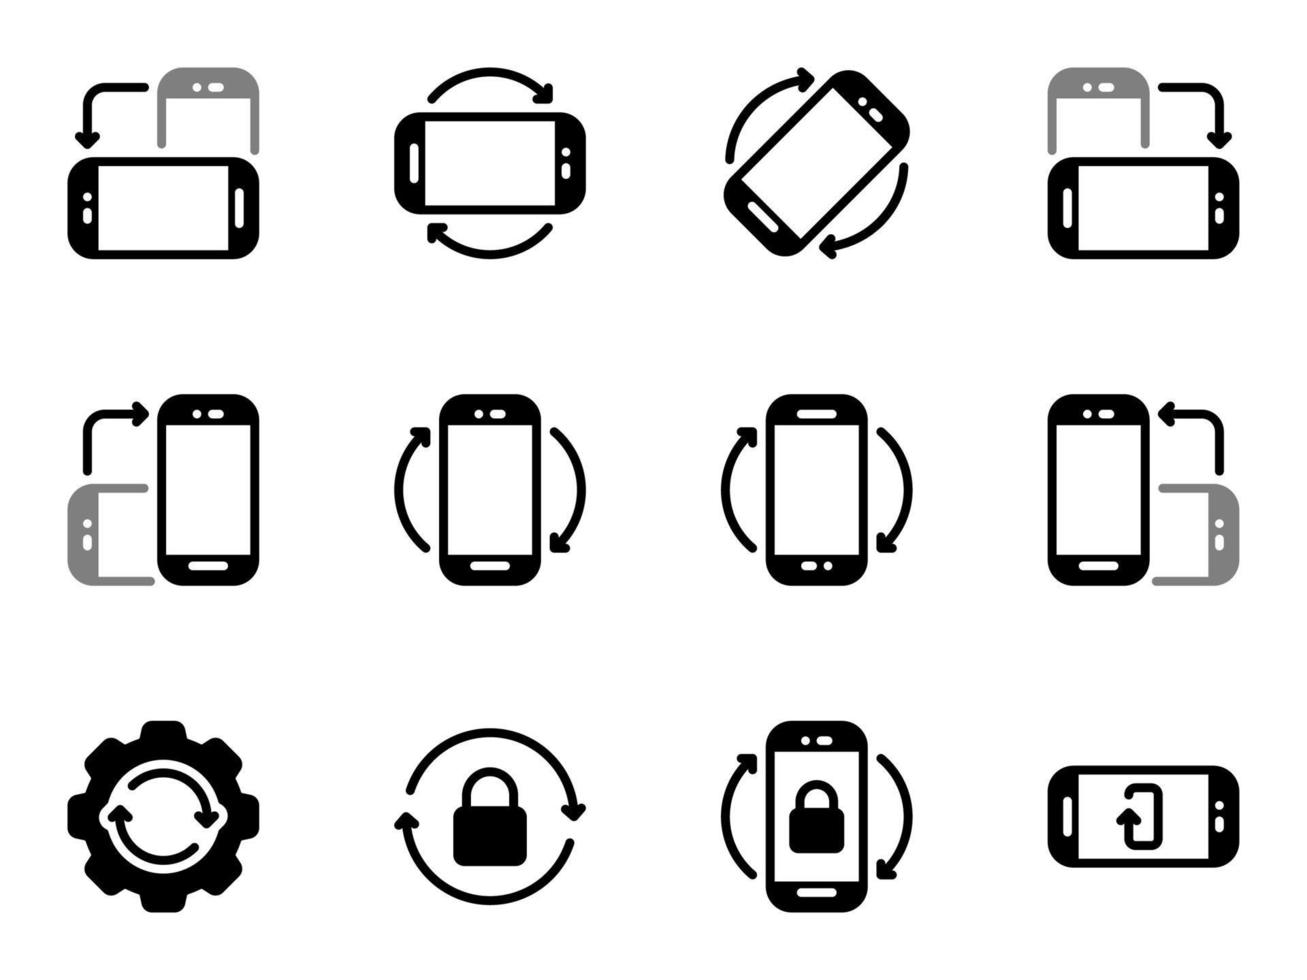 Set of black vector icons, isolated against white background. Flat illustration on a theme function of screen rotation in all directions. Fill, glyph